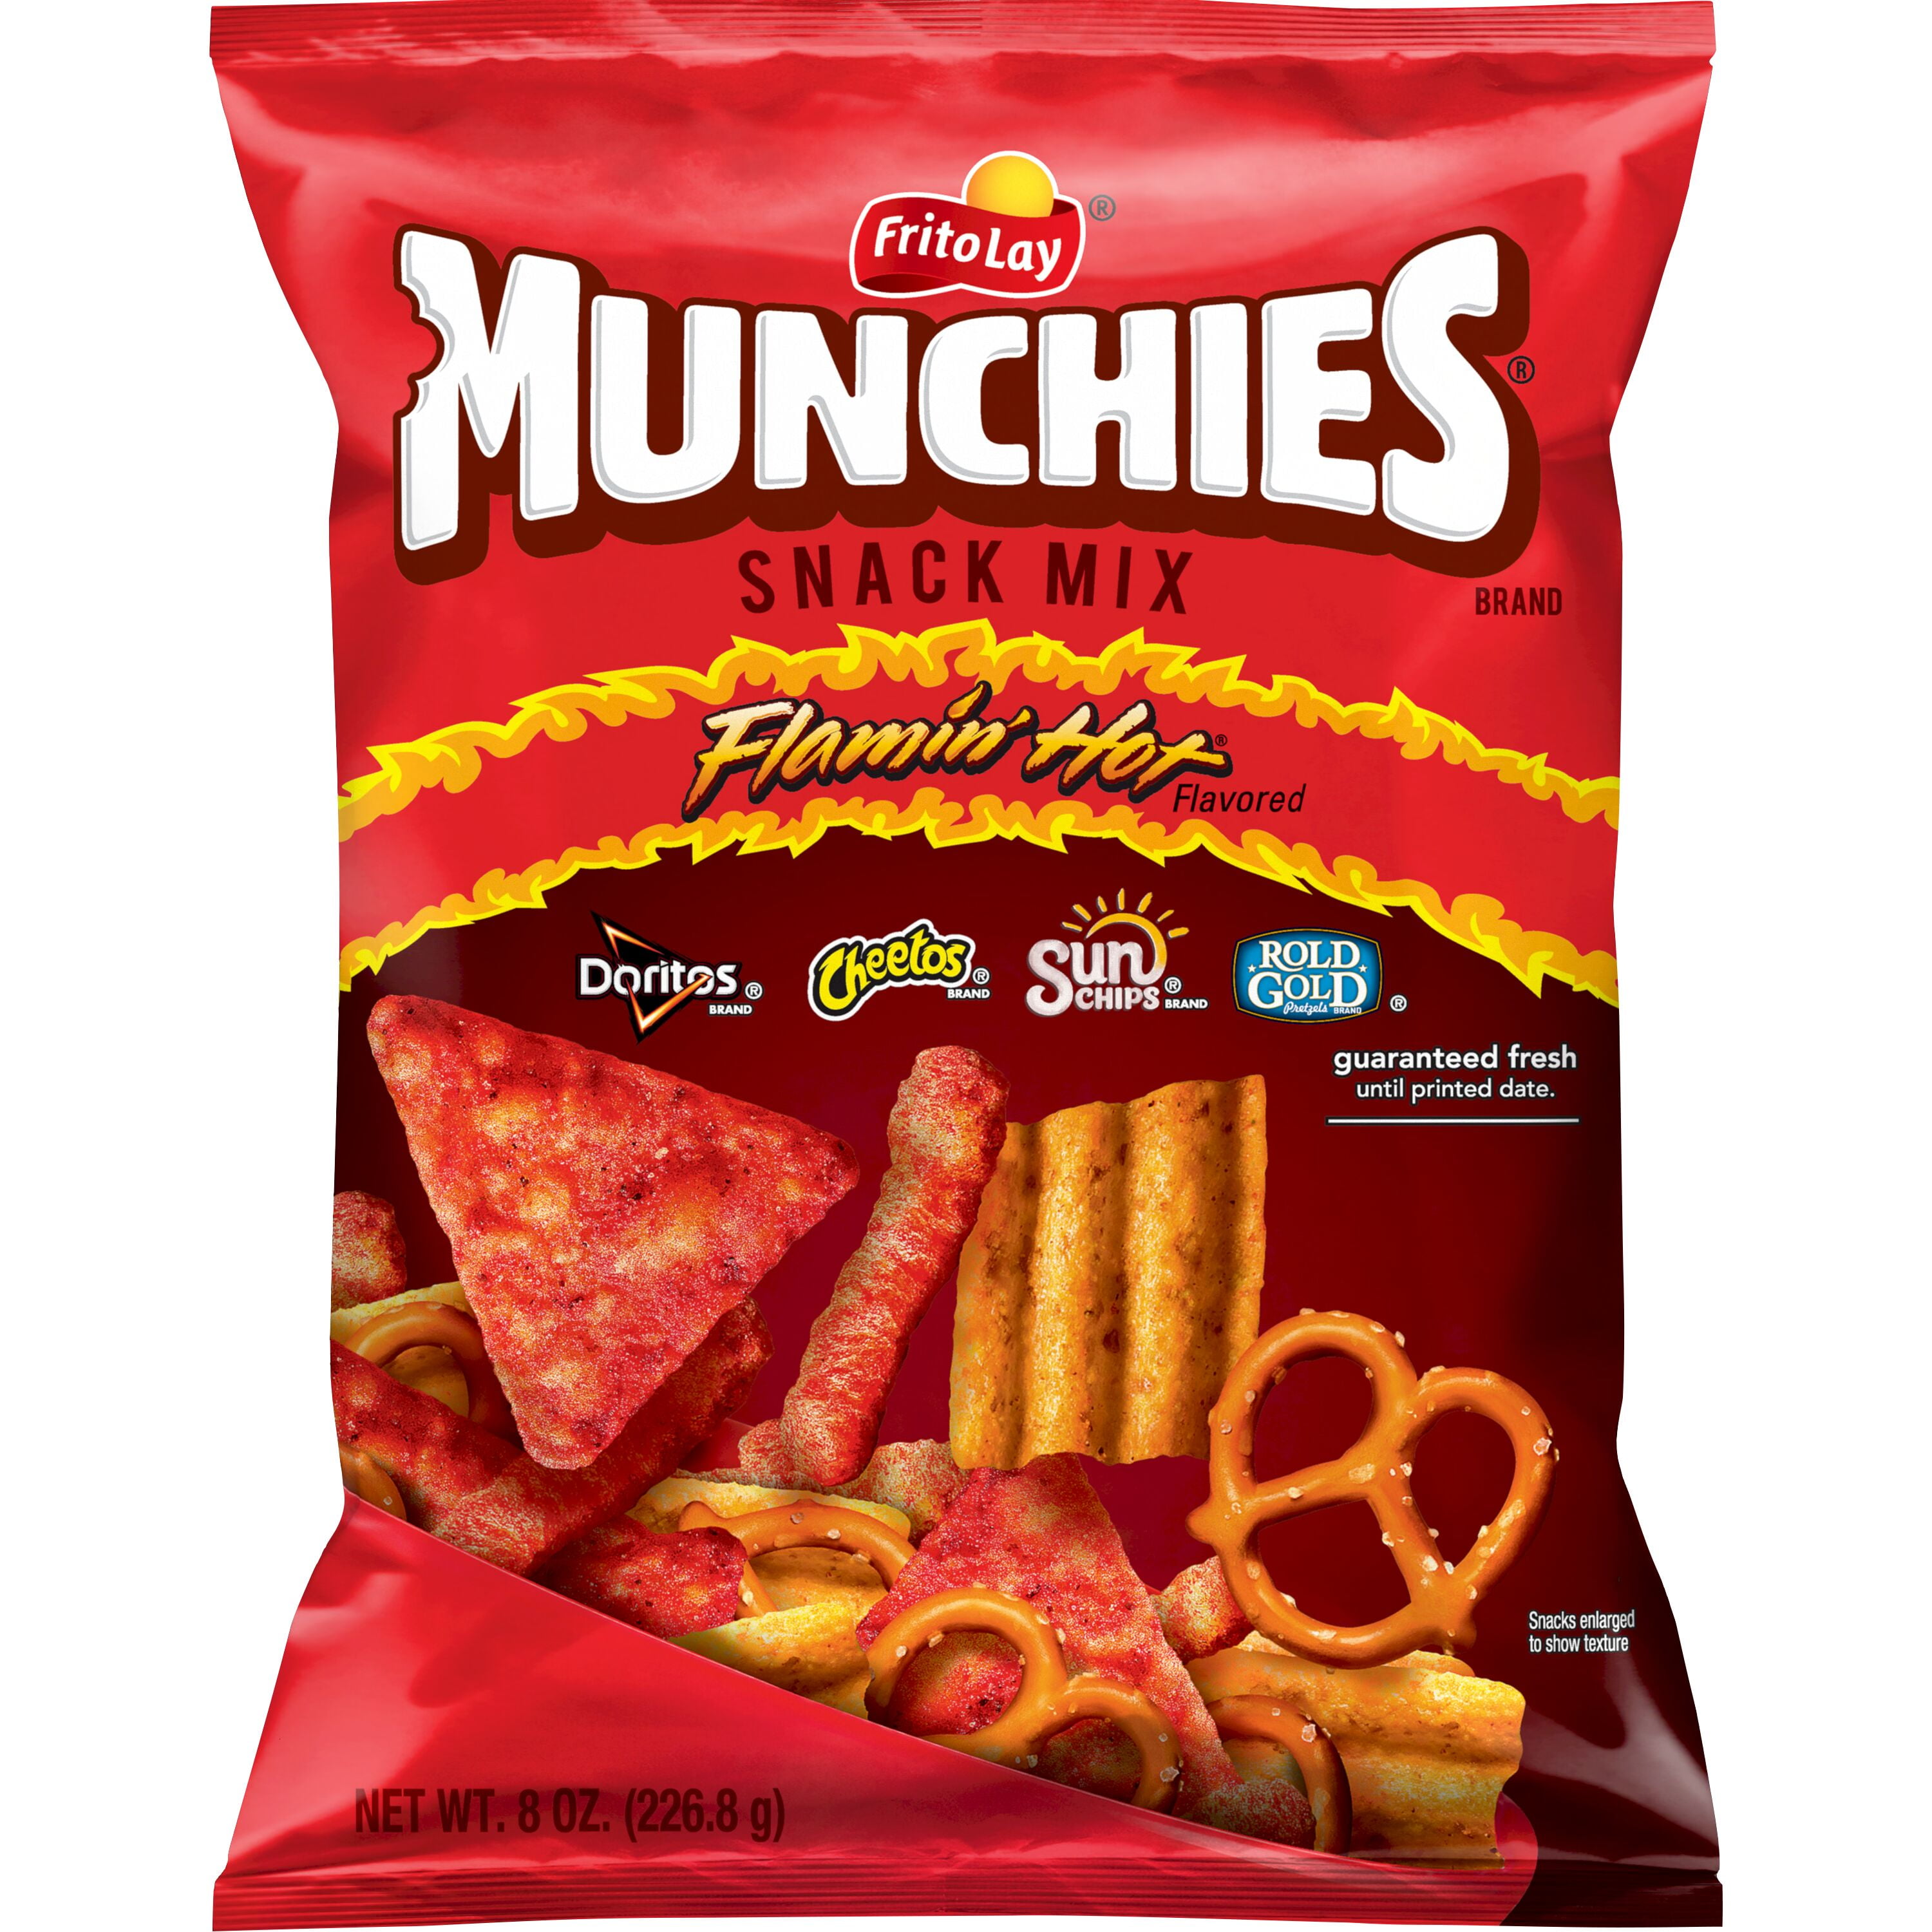 Munchies Flamin Hot Flavored Snack Mix 8 Oz